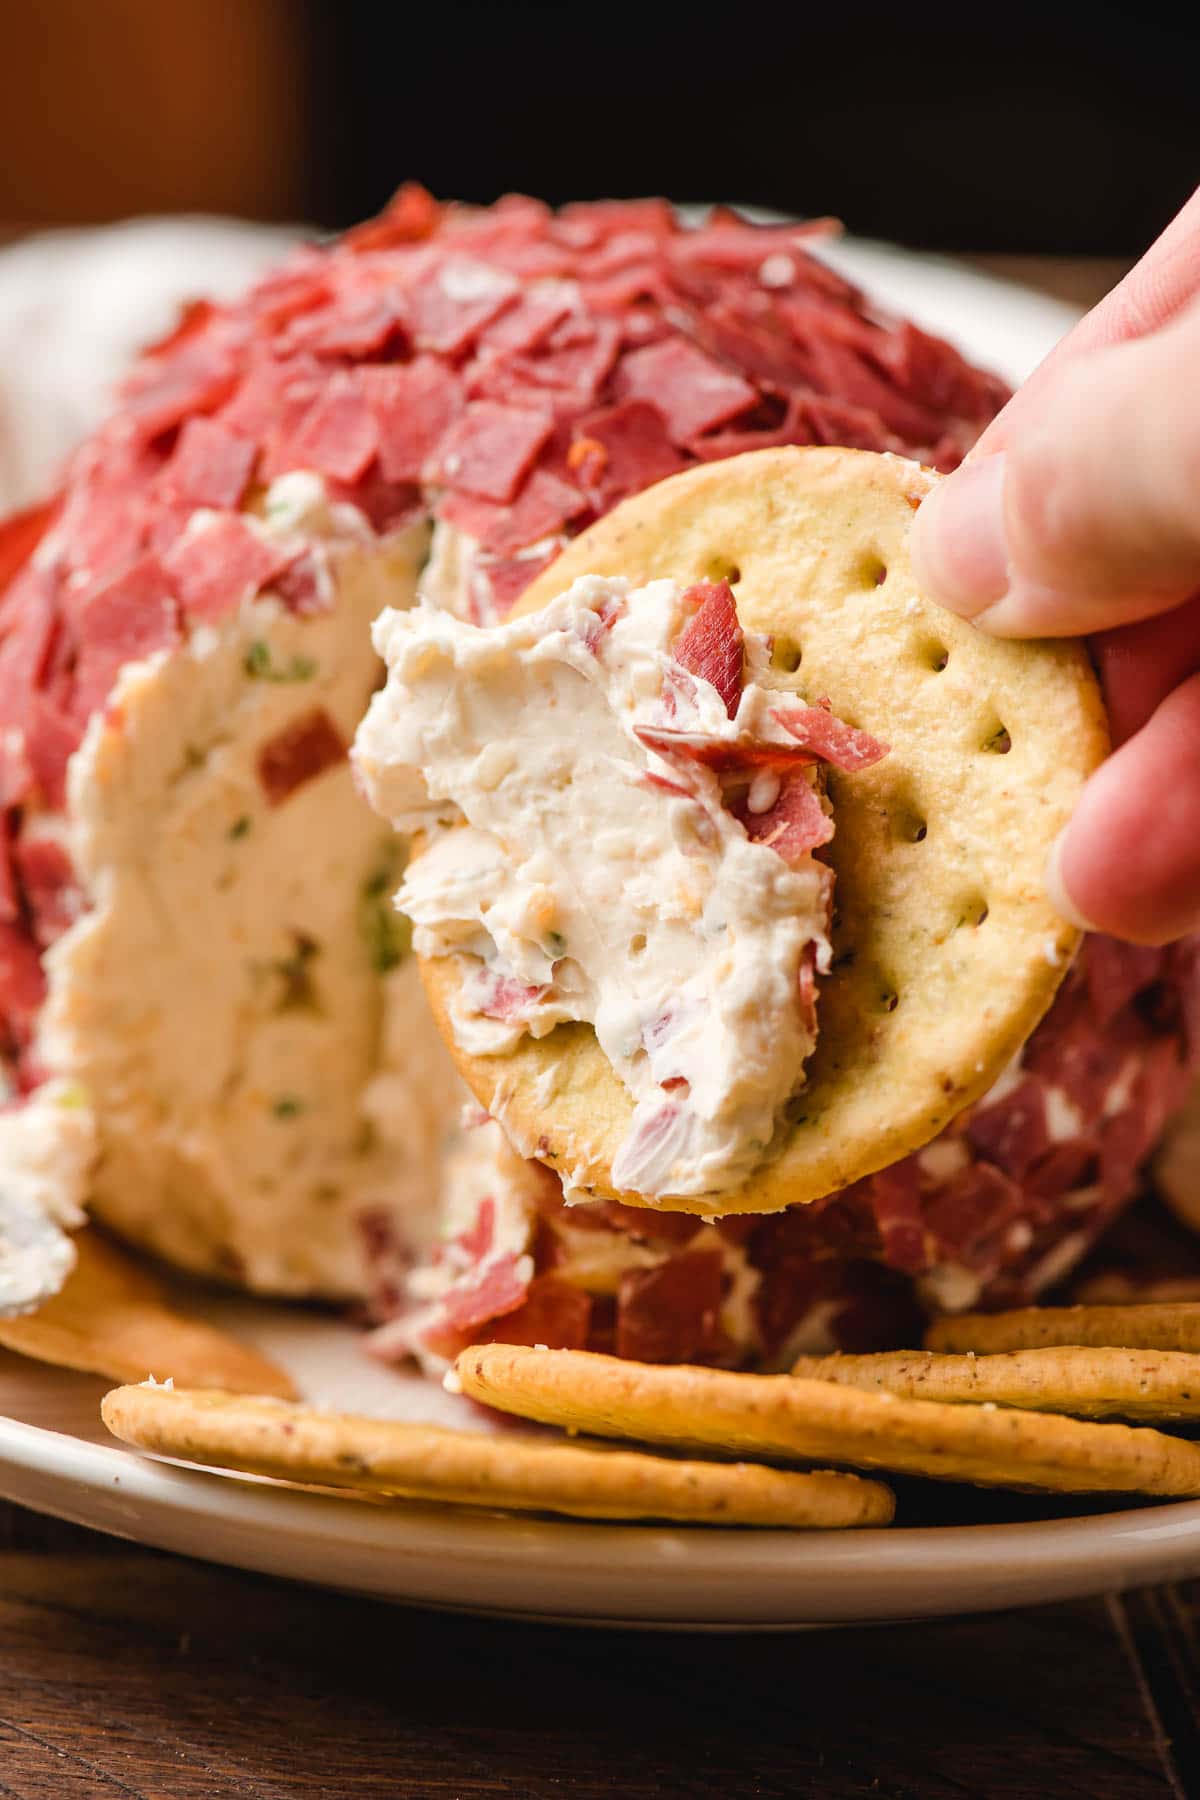 Hand holding a cracker smeared with chipped beef cheese ball.